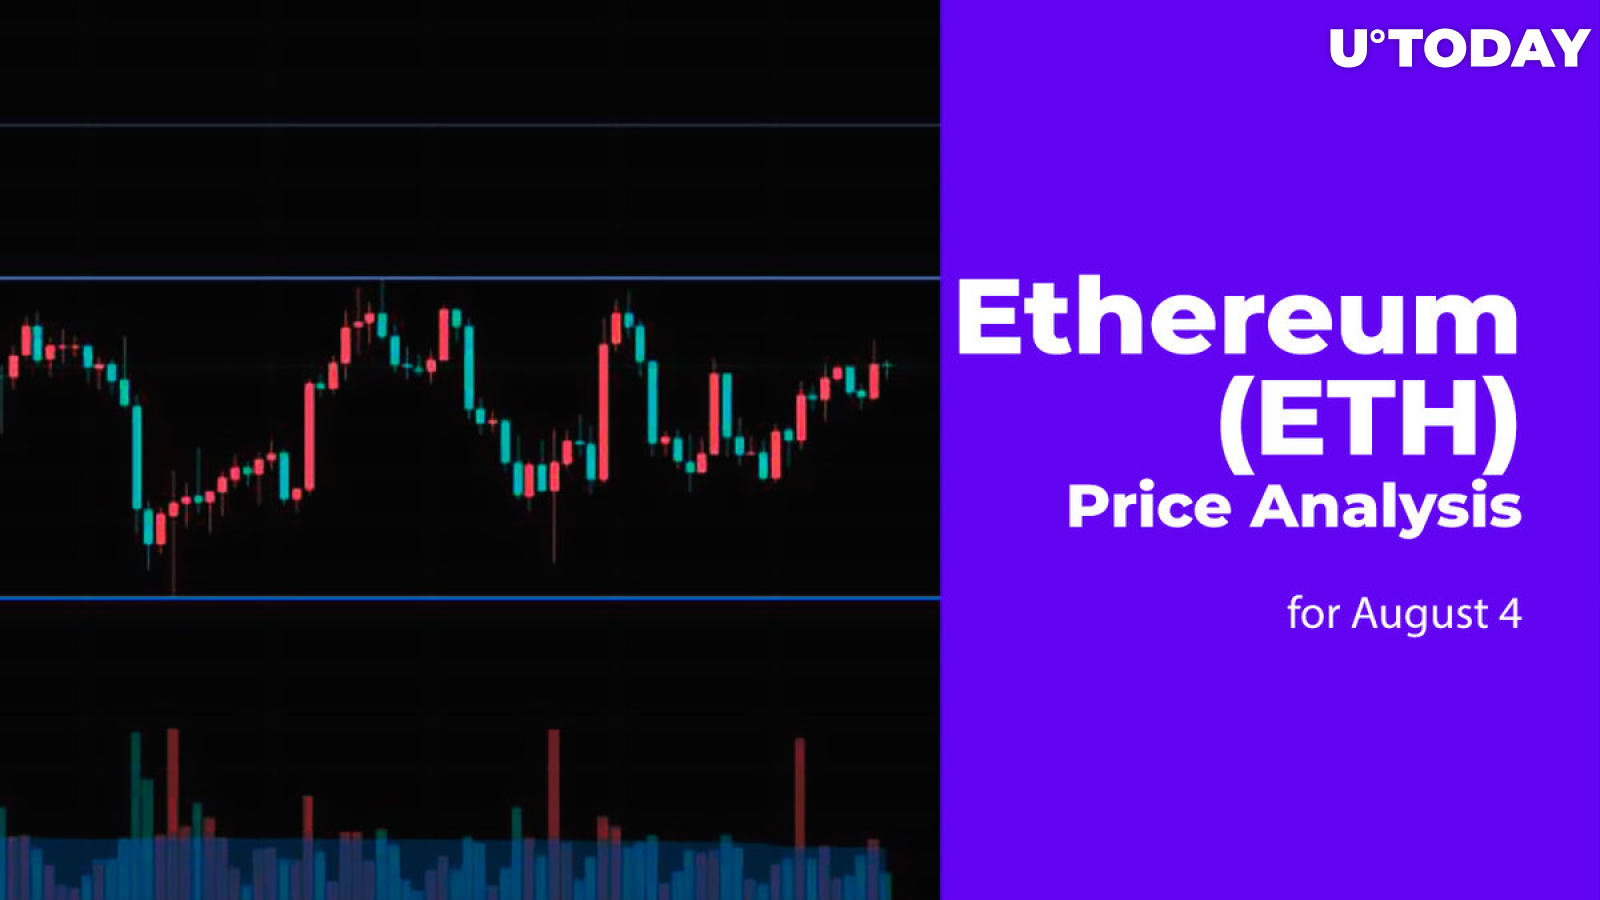 Ethereum (ETH) Price Analysis for August 4